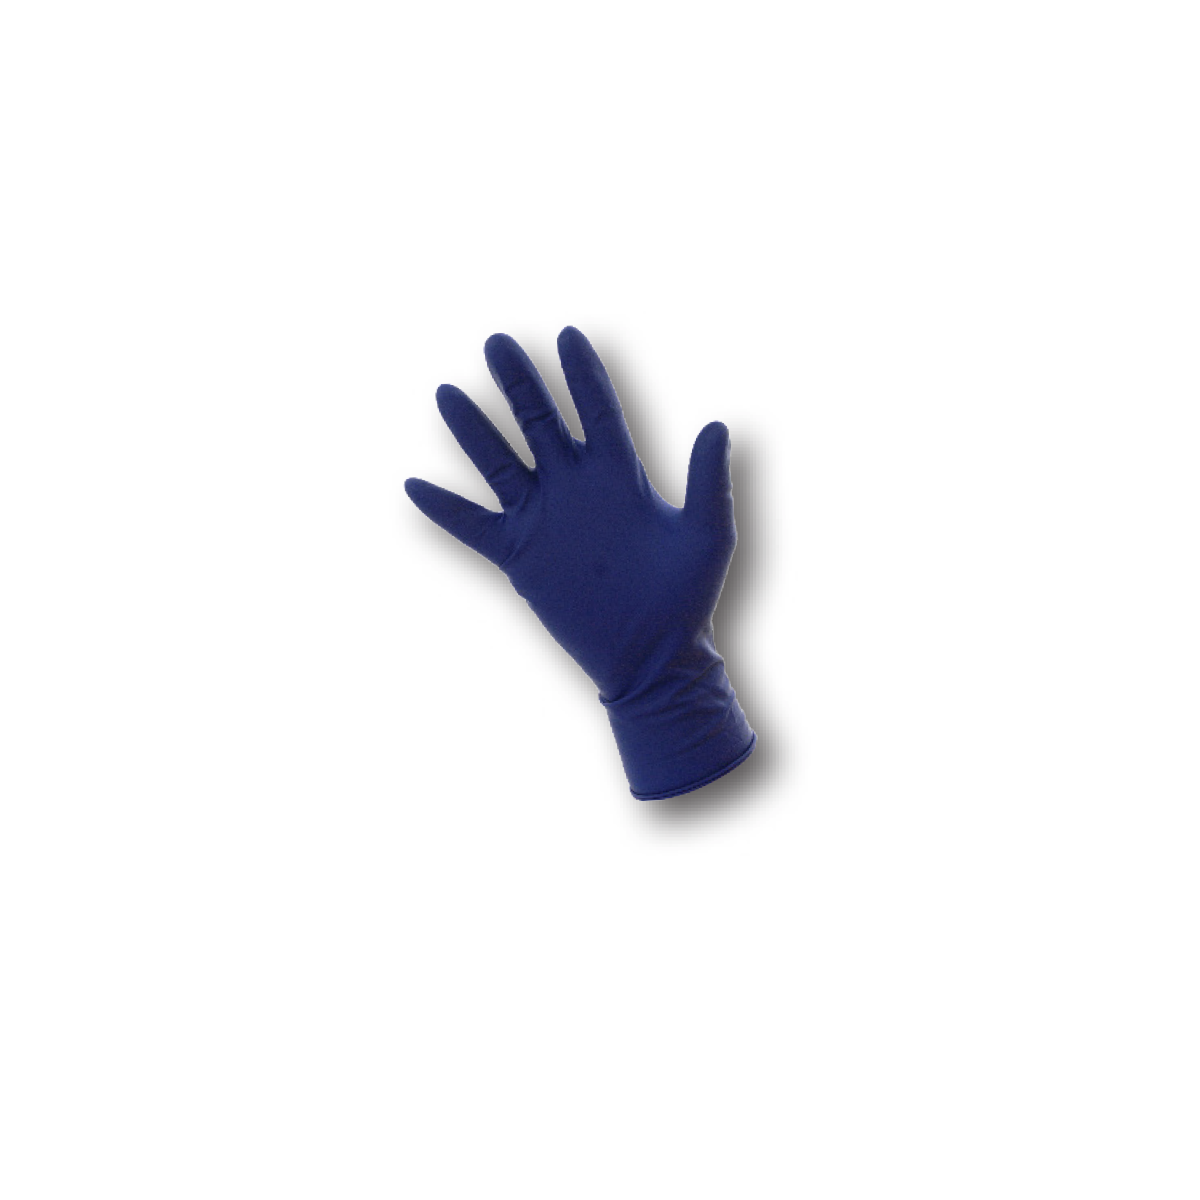 Plumbing Gloves For Plumbers Safety